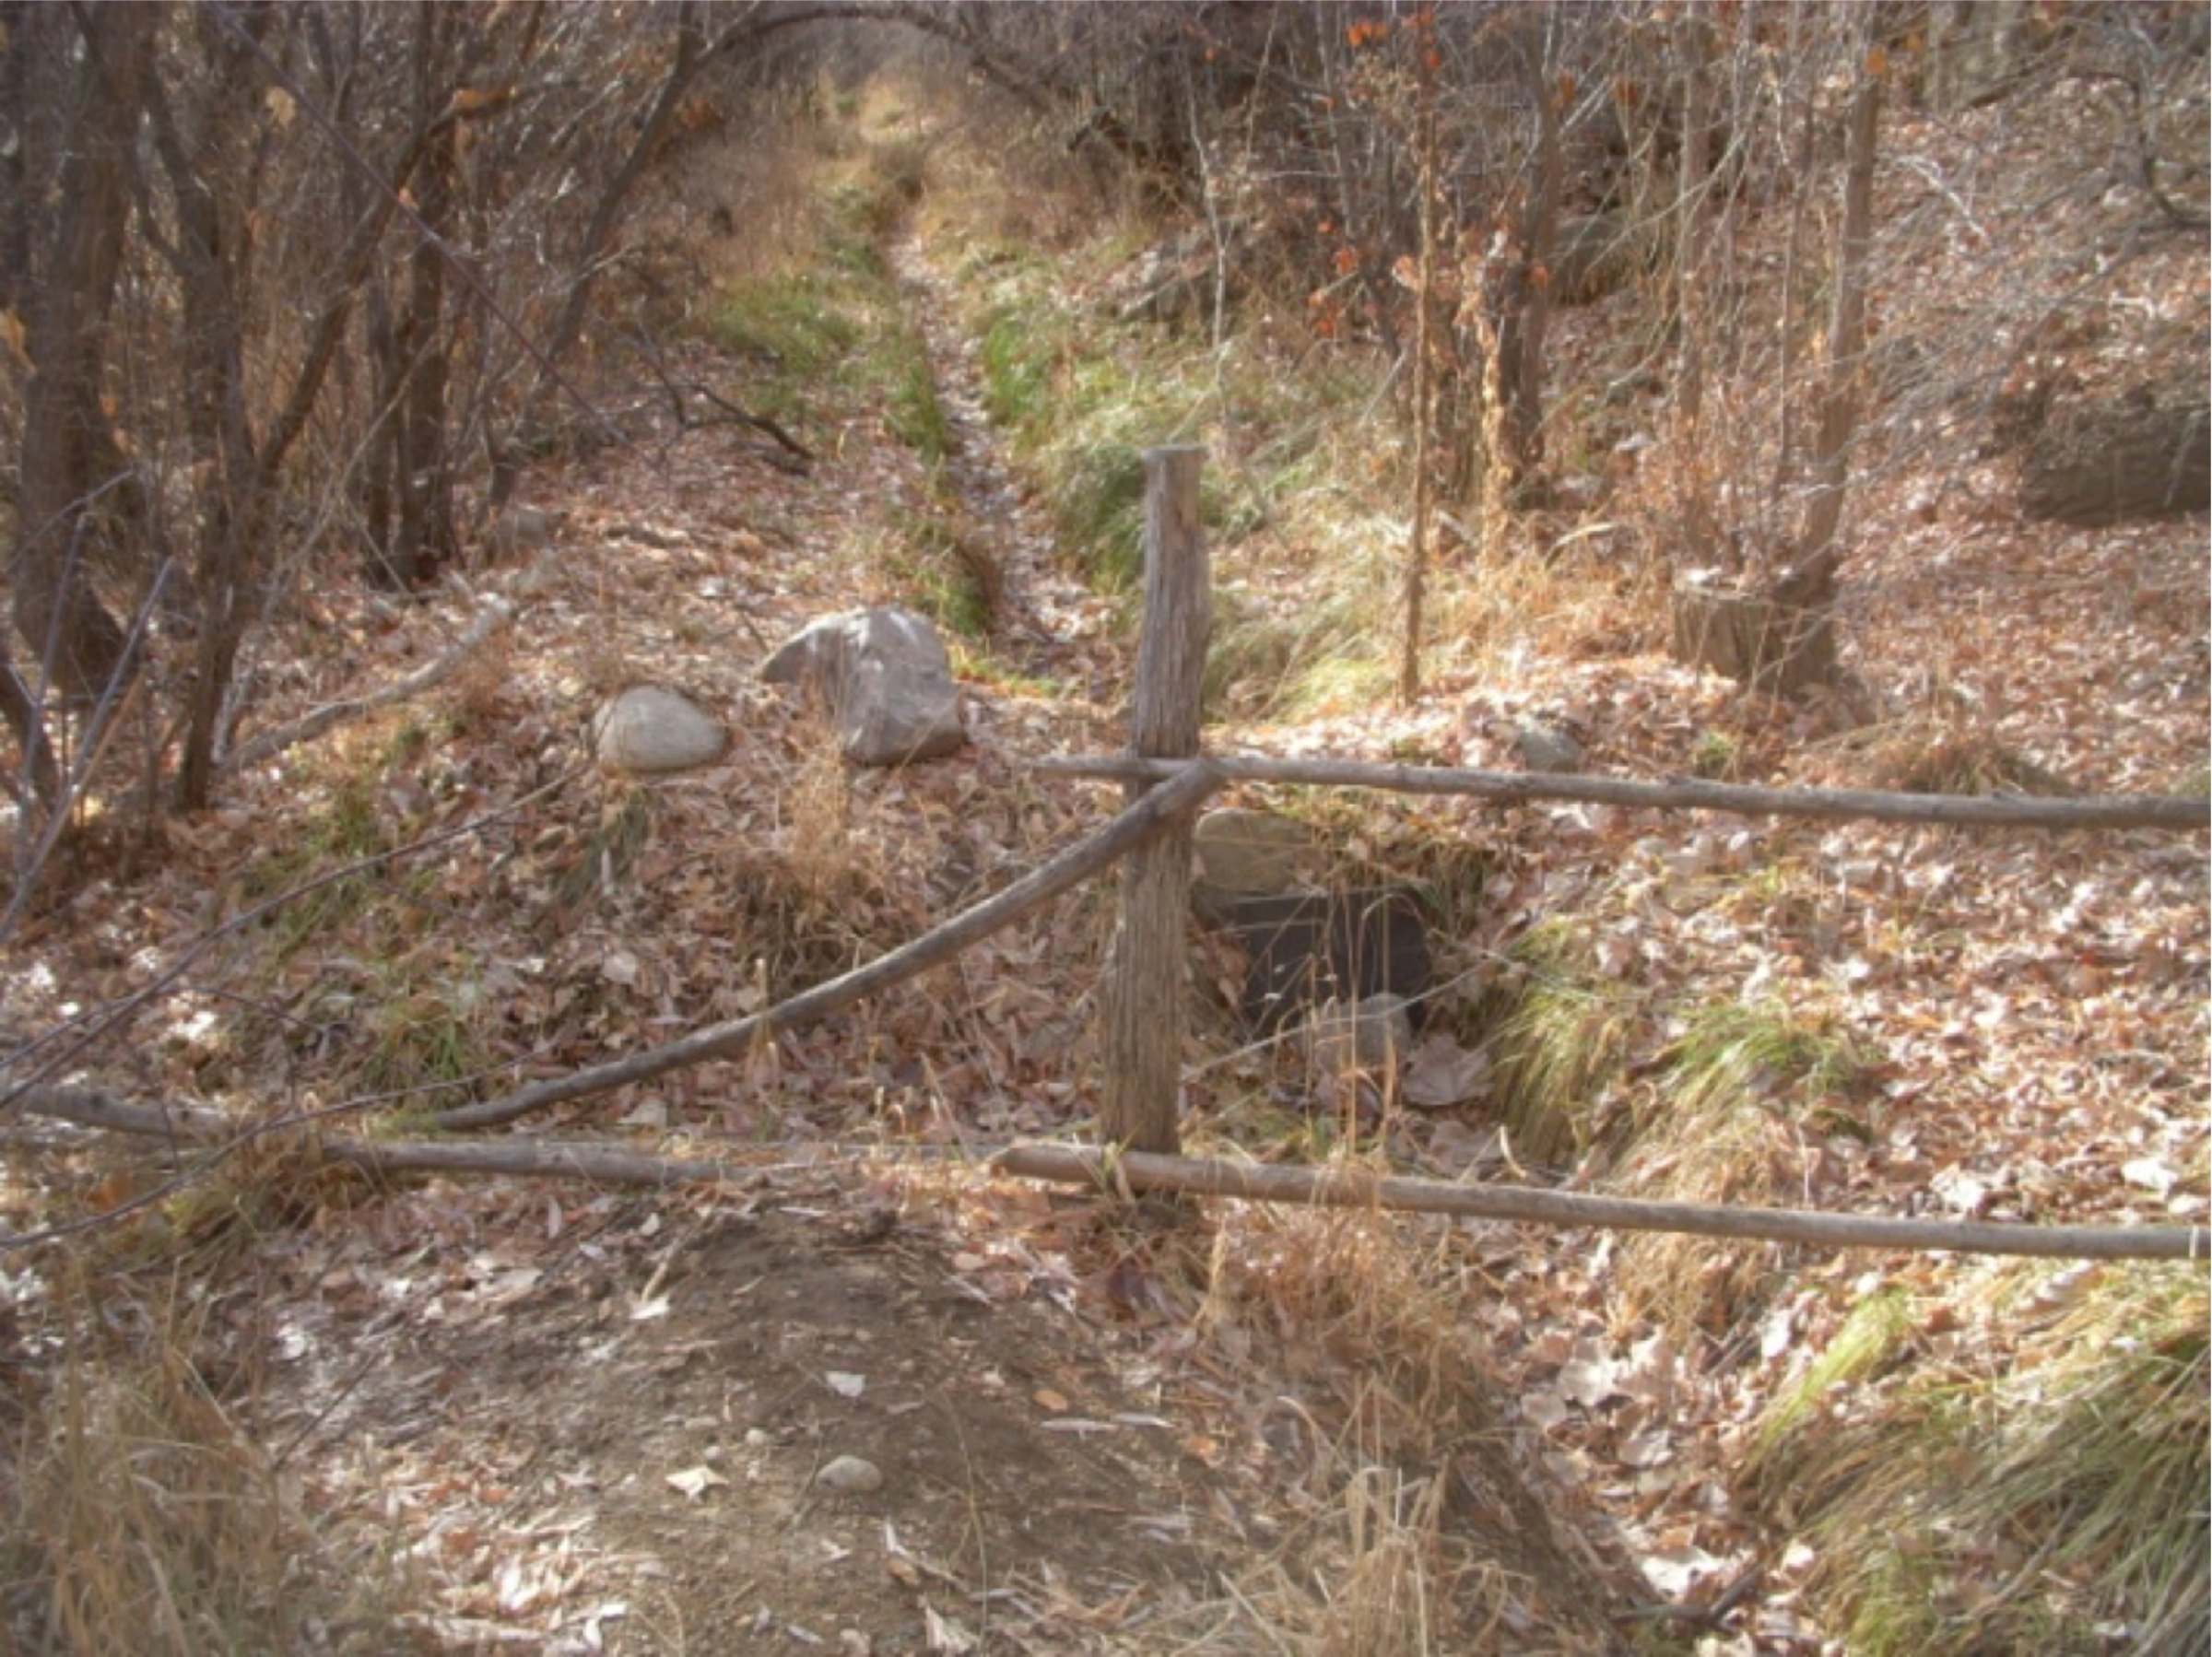  The fence between Armijo Park and the property at 1400A Cerro Gordo. The board controls flow into the acequia, which continues into the private property, or into the ditch on the left which shunts the water back into the river.   photo by the Debora